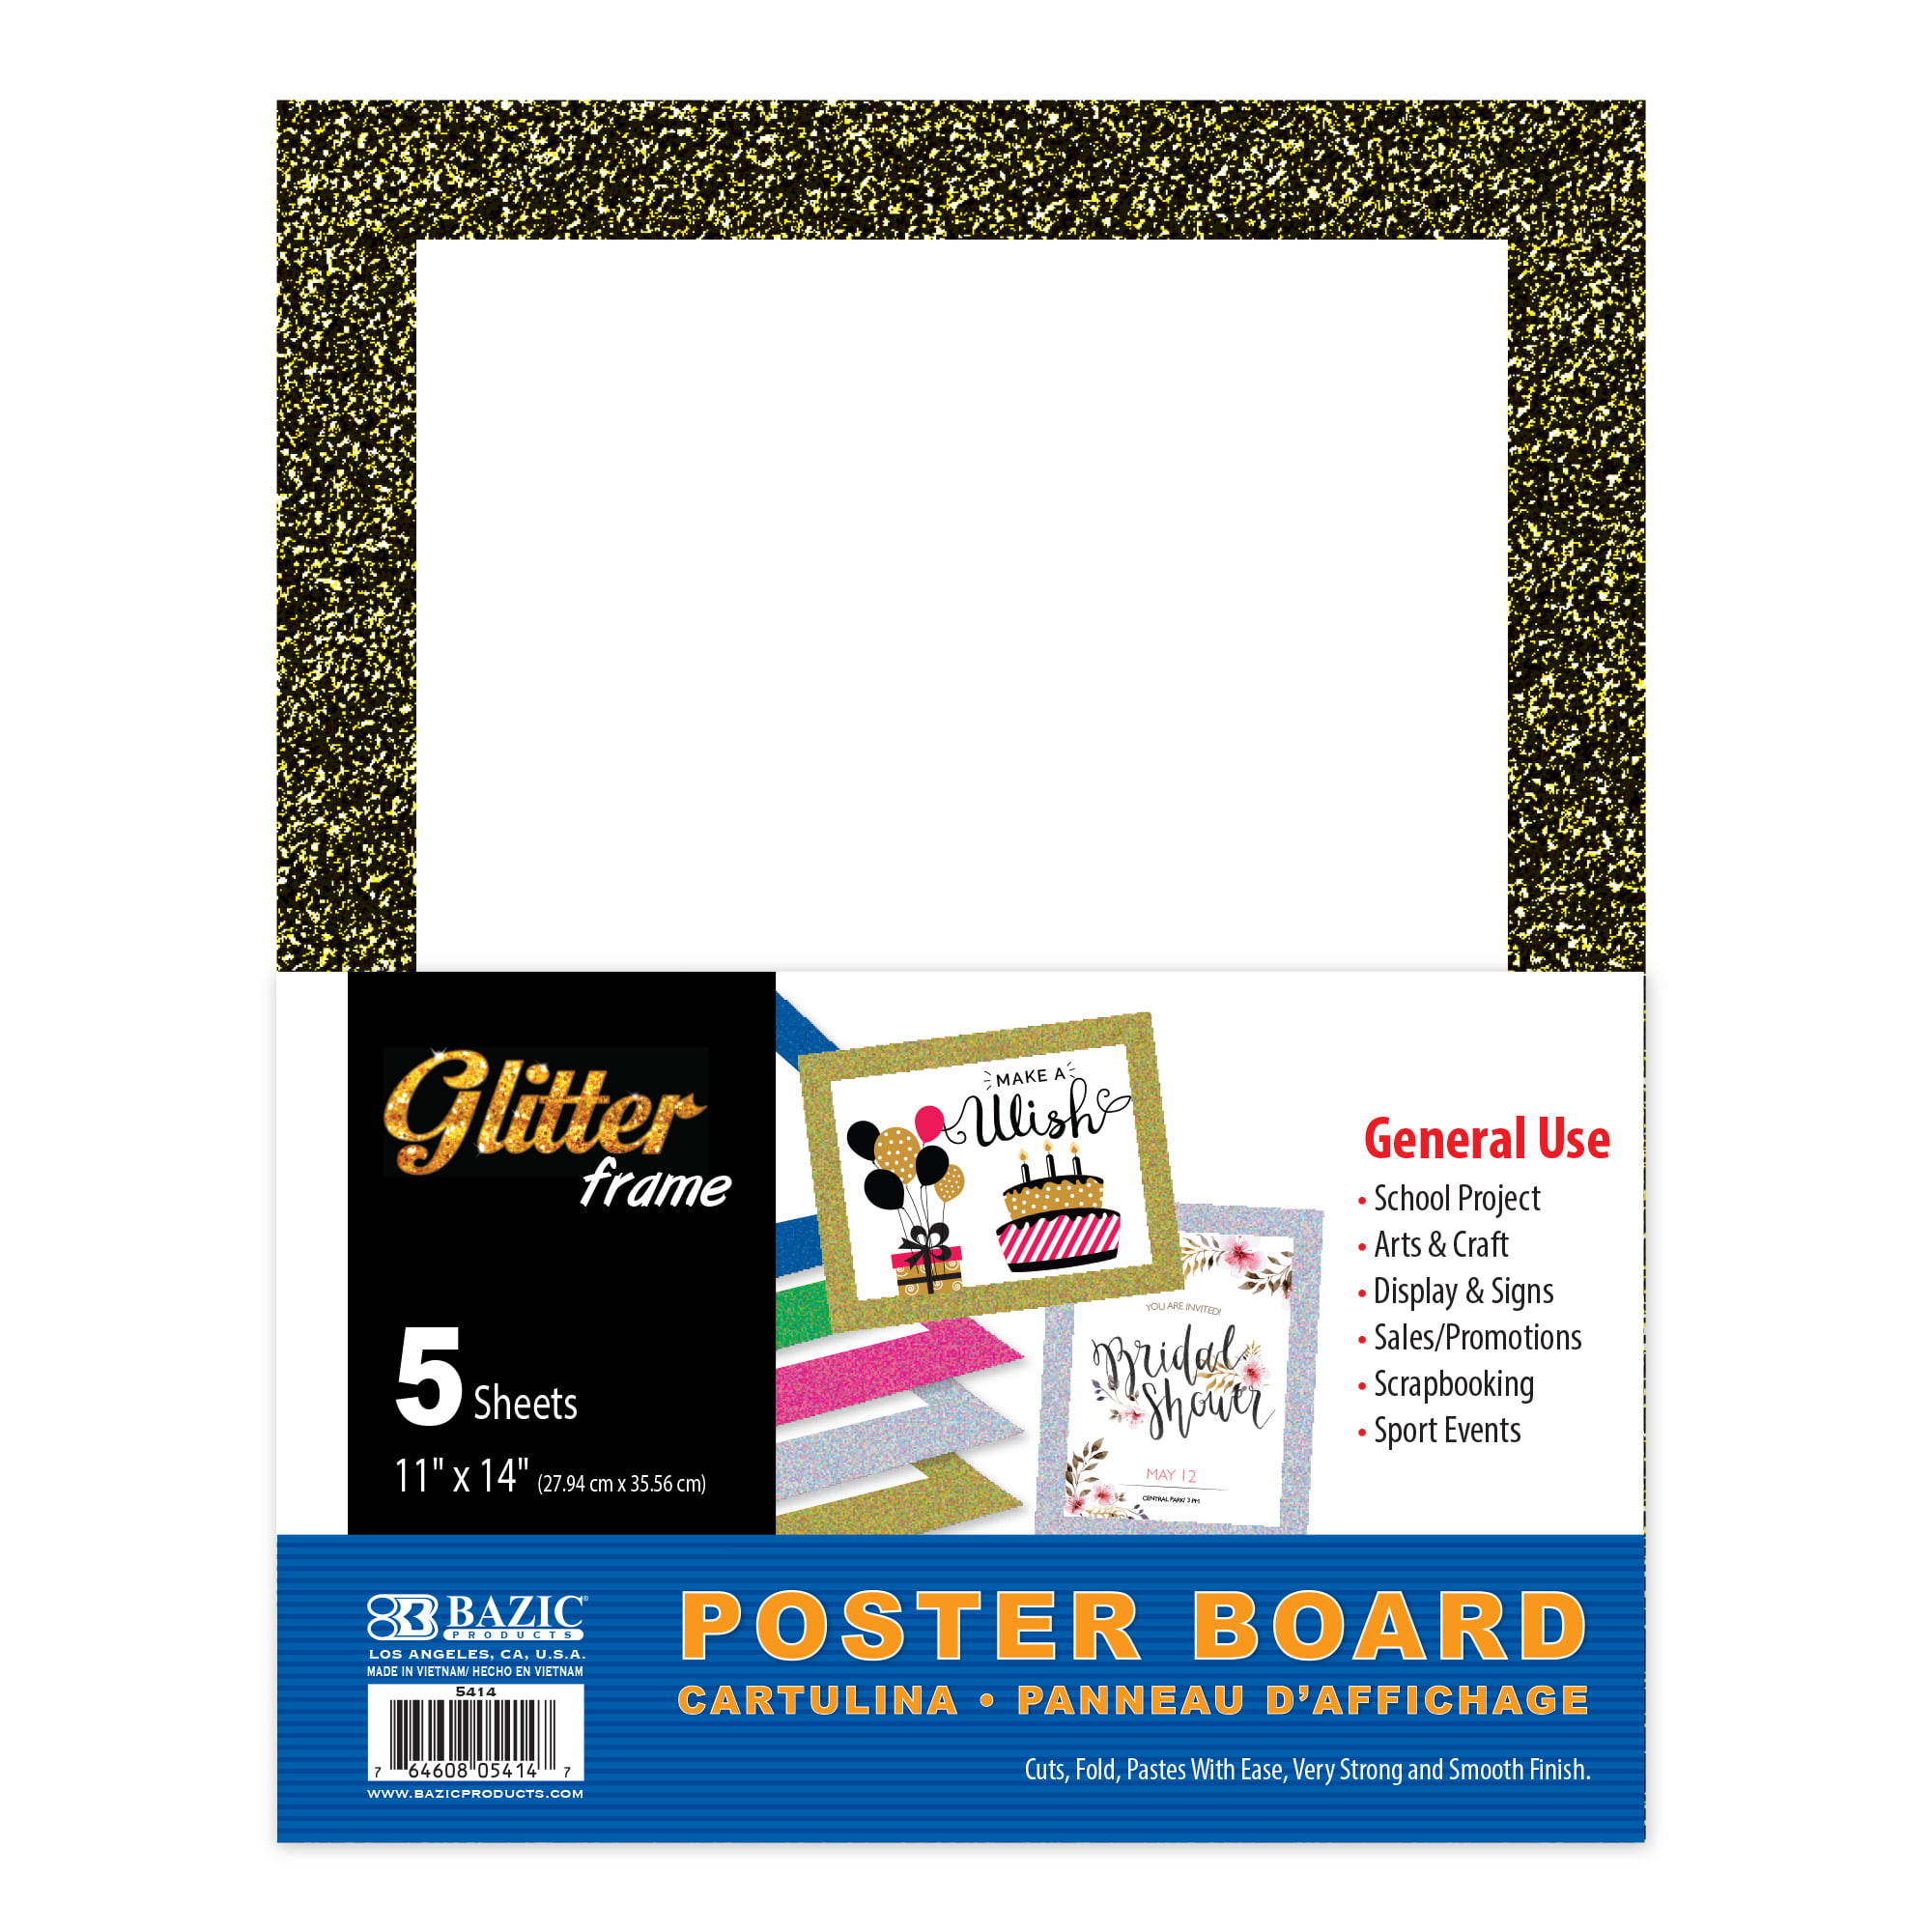 Pack of 10 22” x 28” Ecological Fibers Premium 100% Recycled Poster Board Black